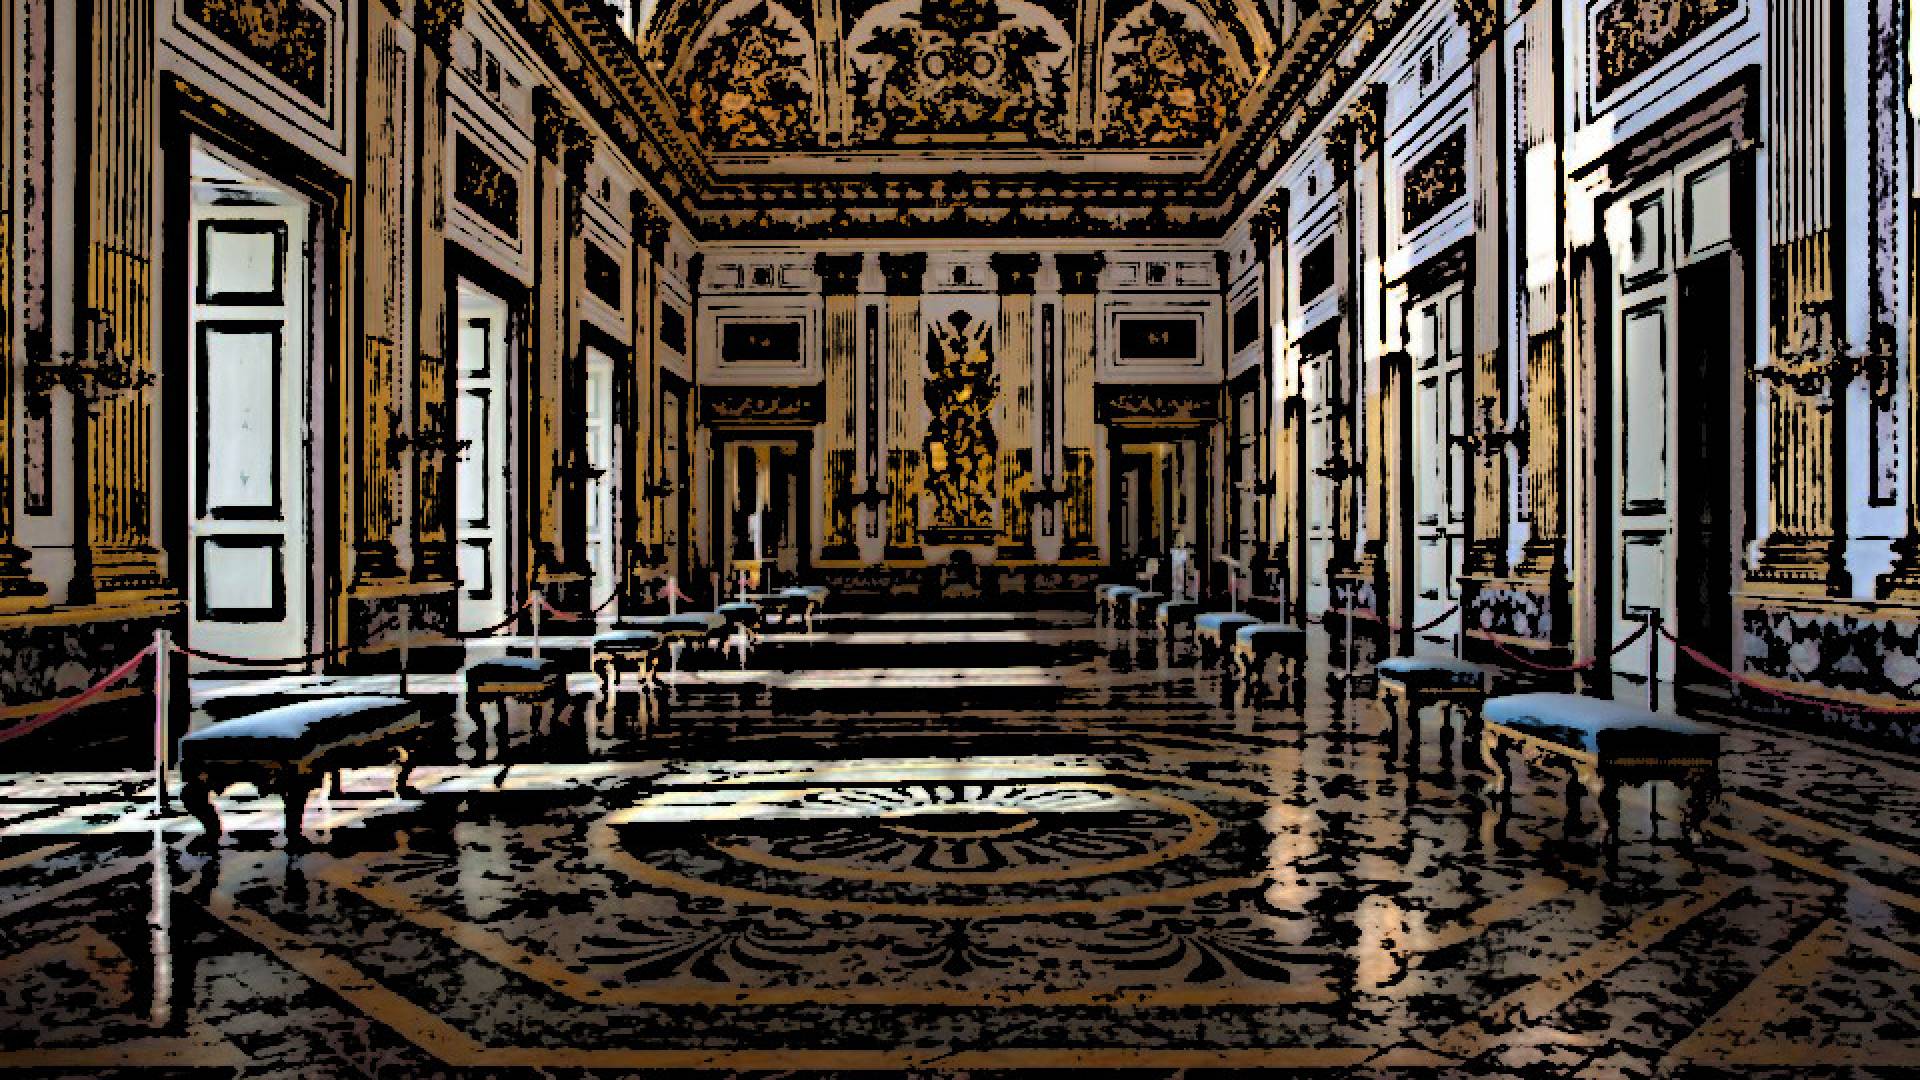 ROYAL PALACE OF CASERTA, Throne Room